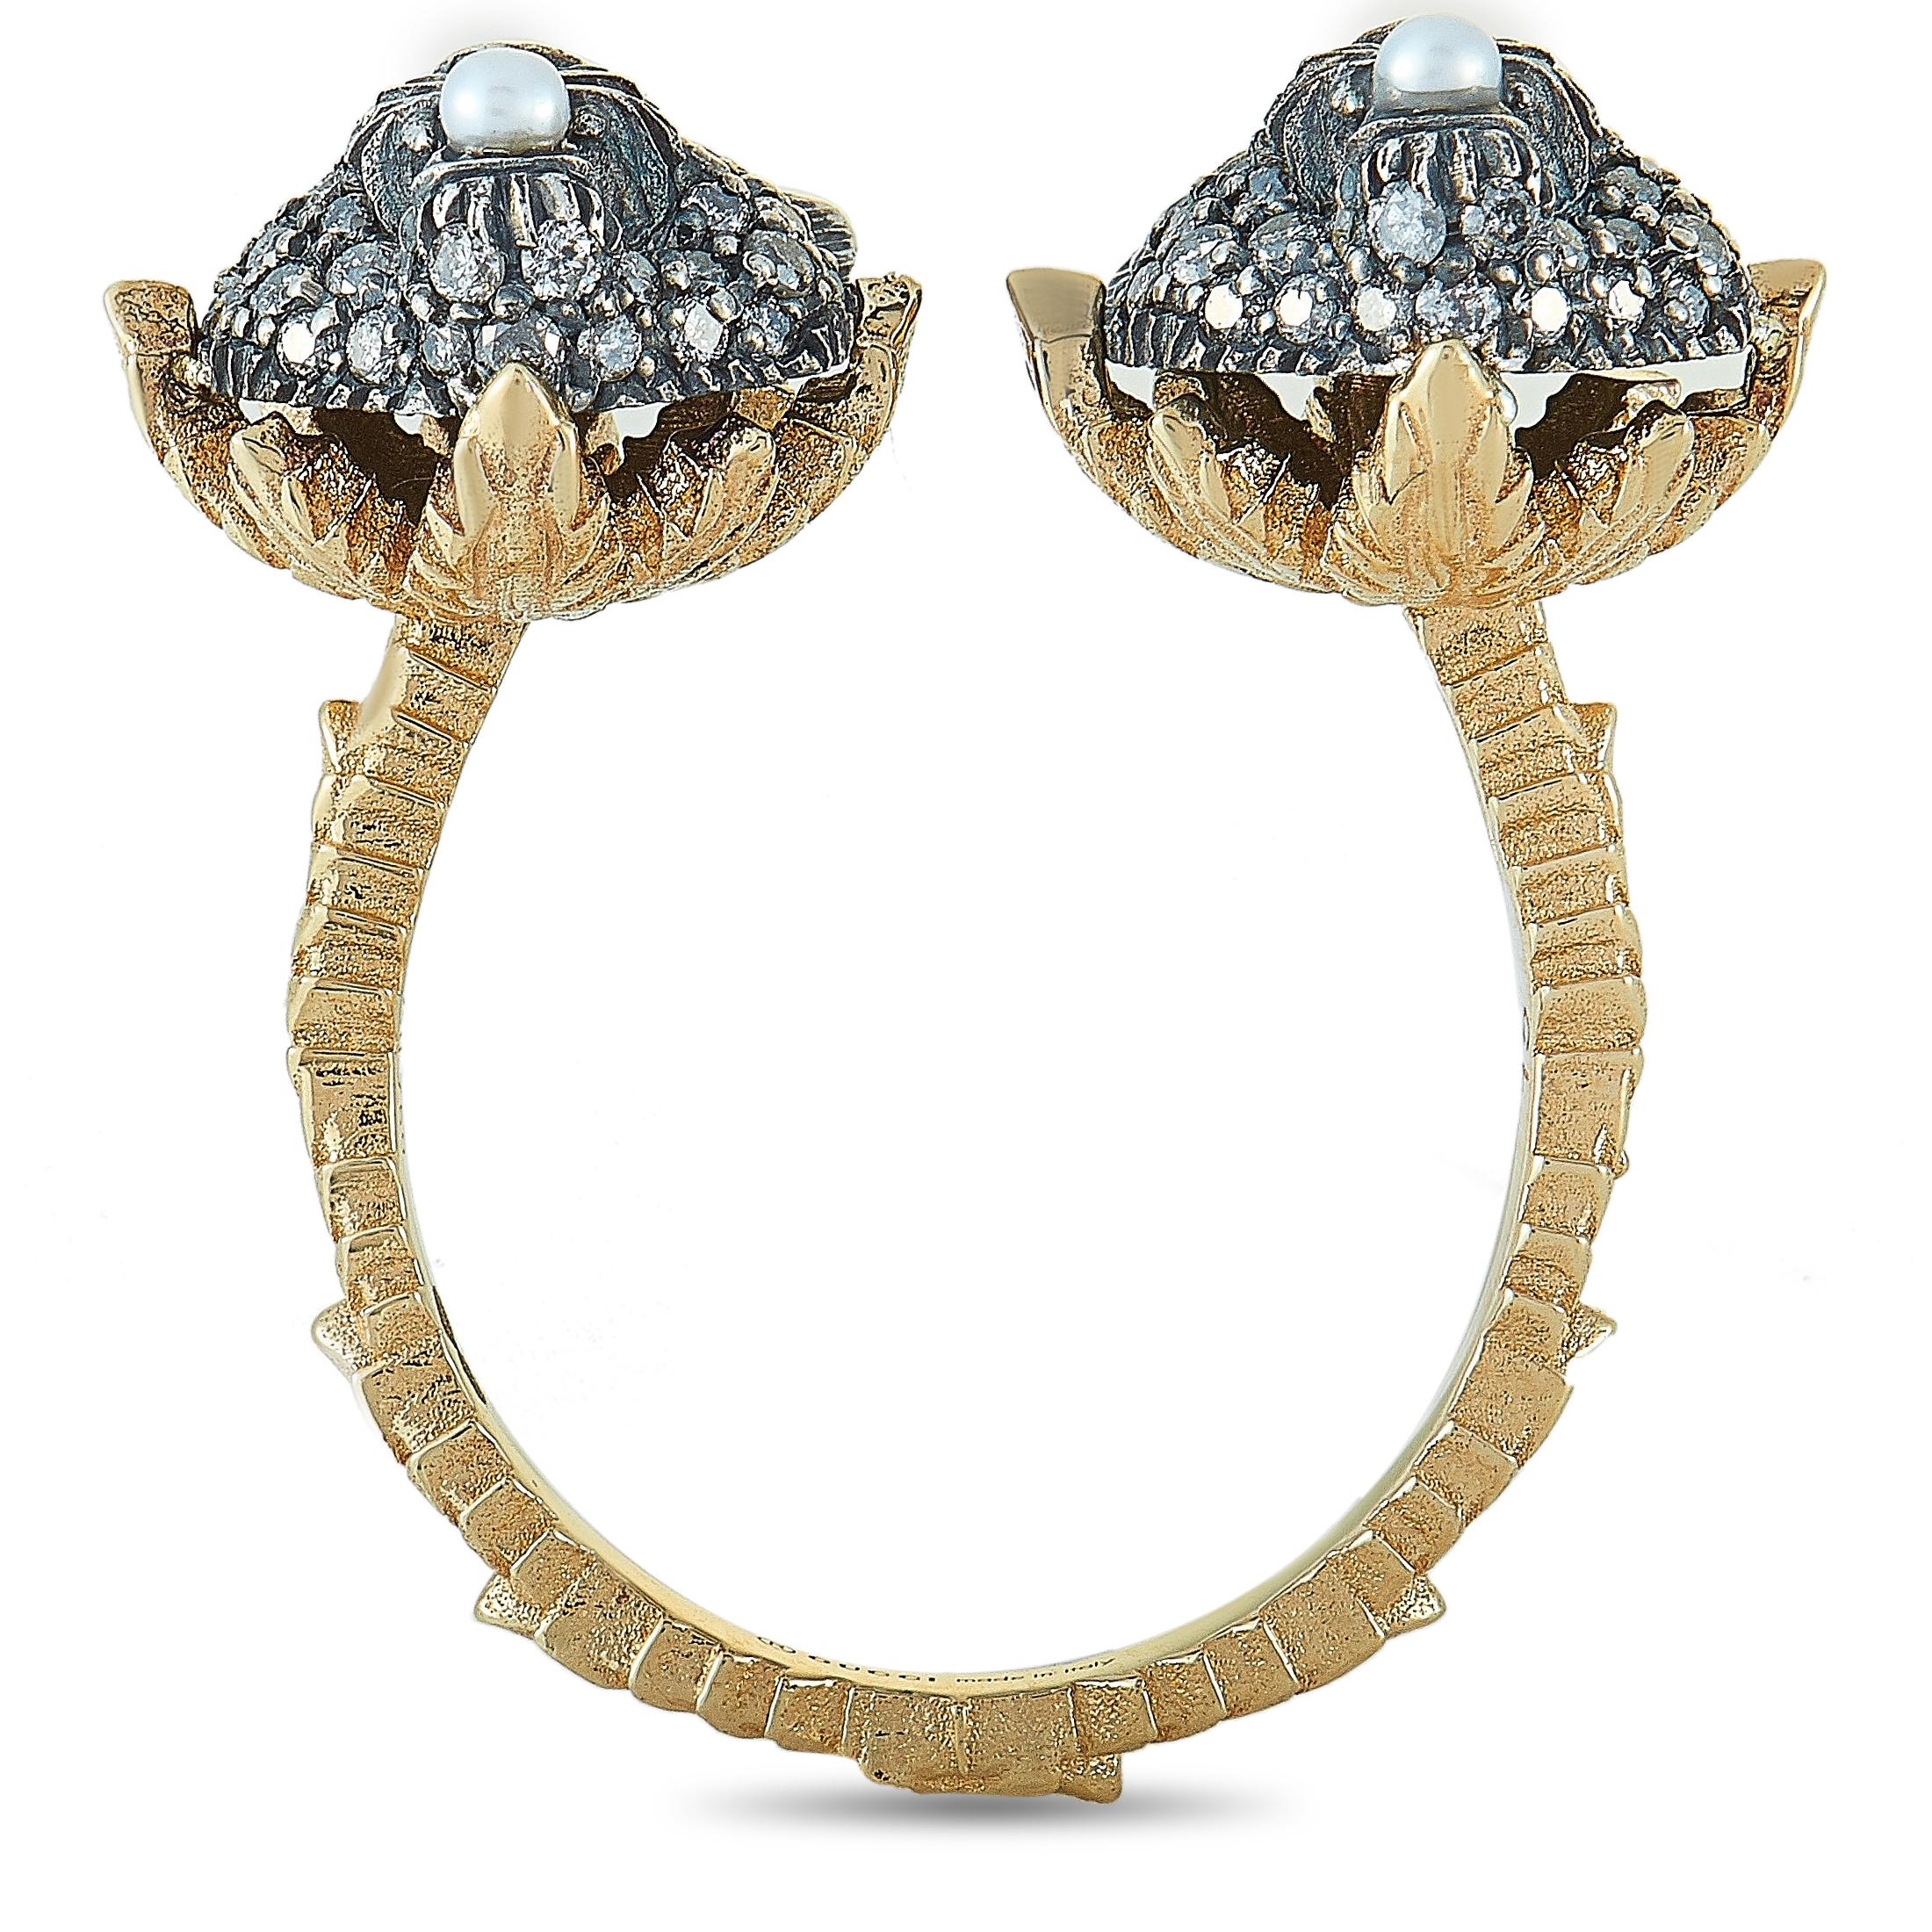 The “Le Marché des Merveilles” ring by Gucci is made out of 18K yellow gold and aged silver and set with white and gray diamonds and two pearls. The gray diamonds amount to approximately 0.62 carats and the white ones feature GH color and VVS